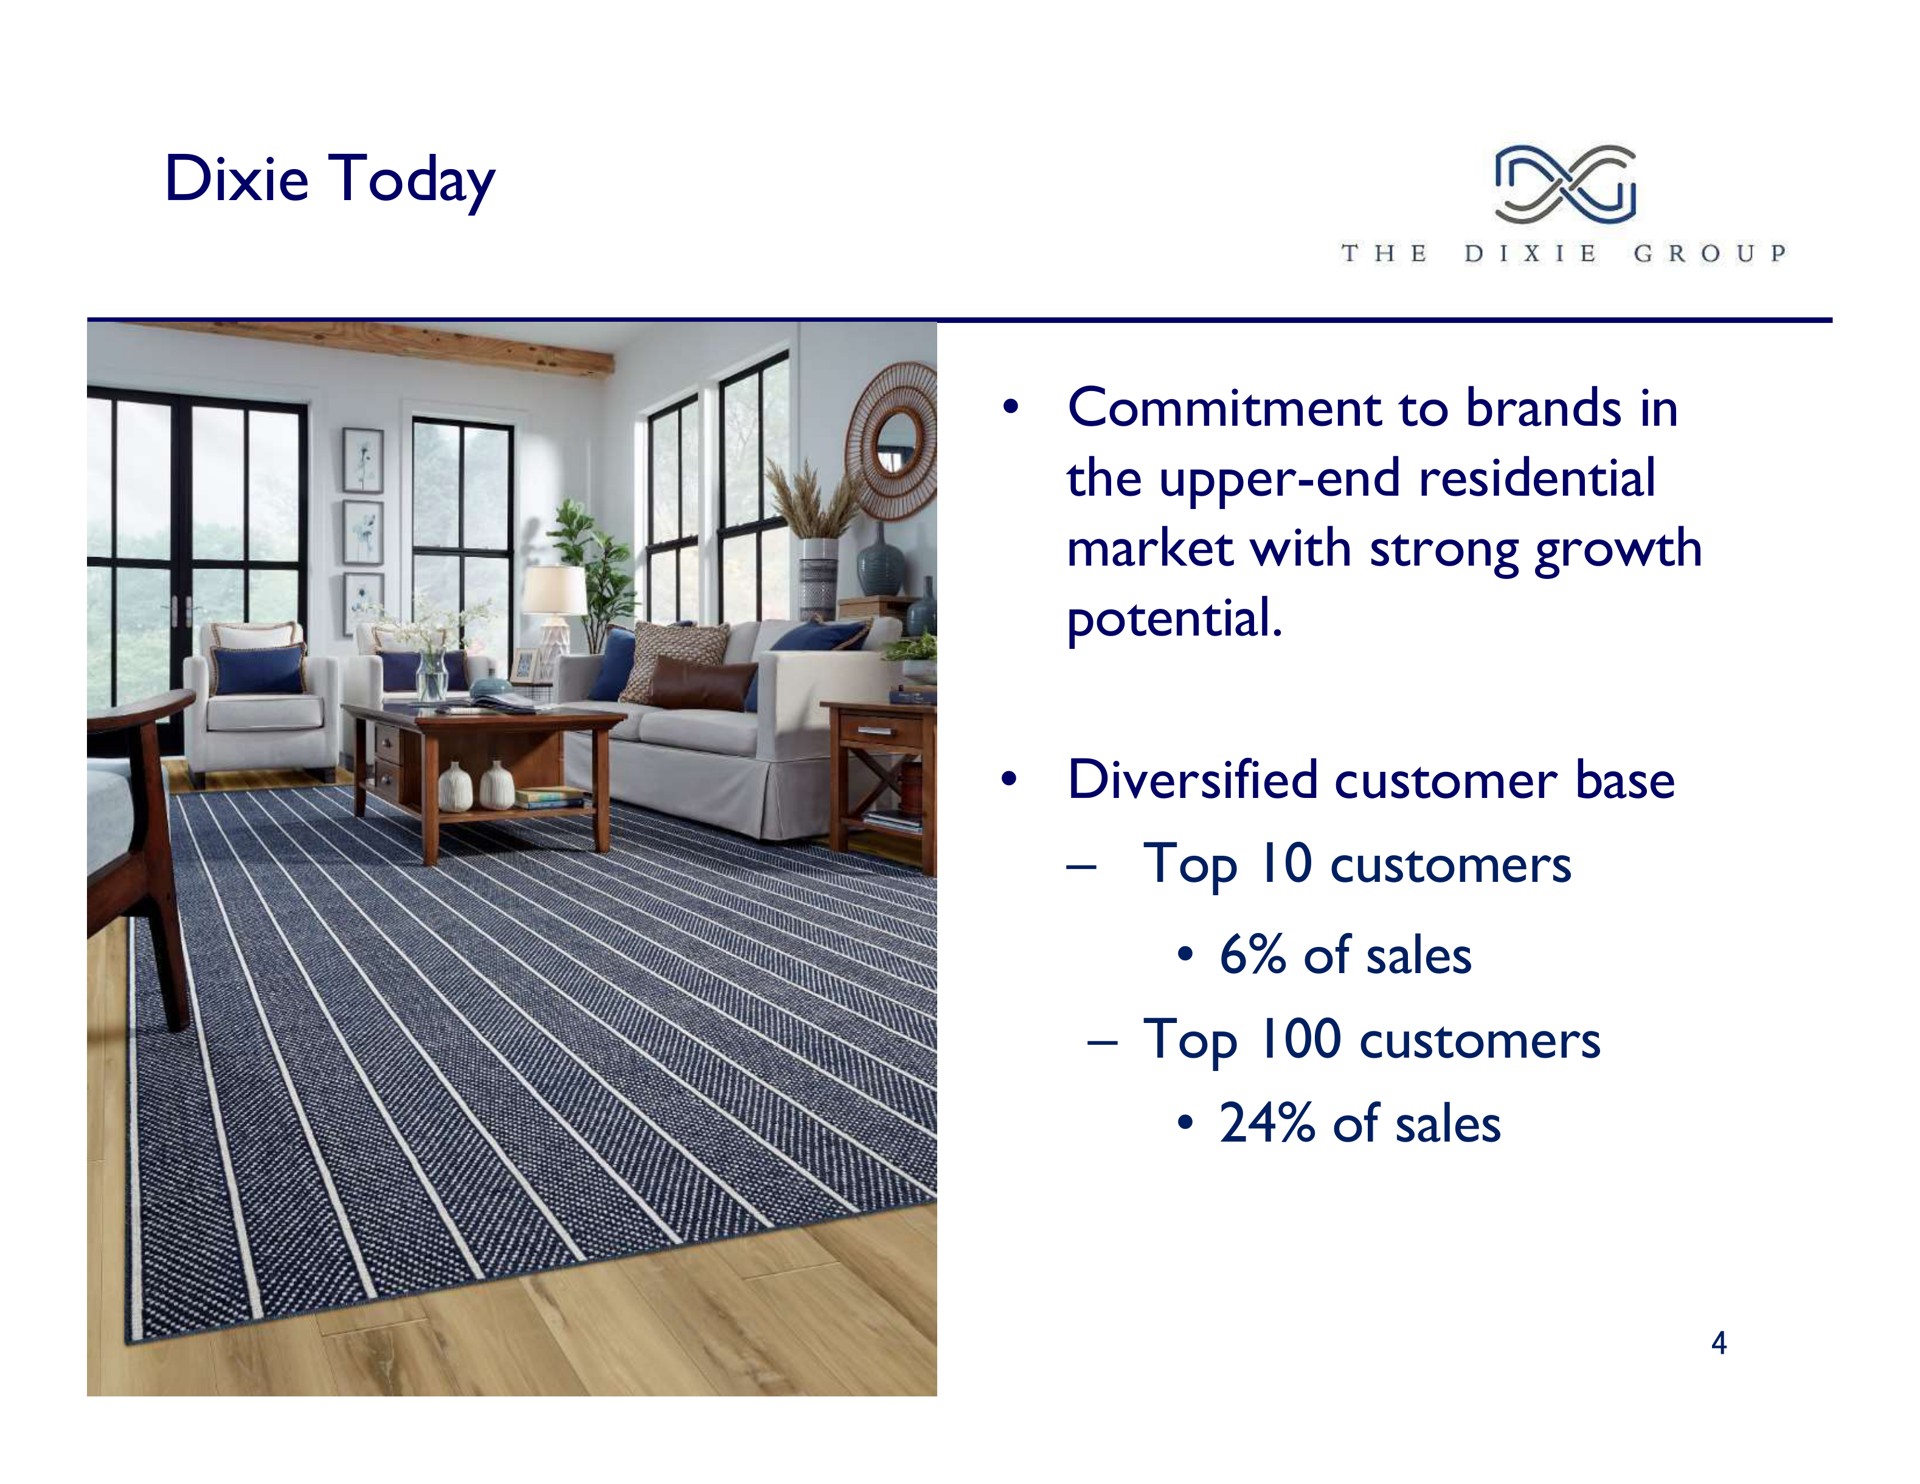 dixie today commitment to brands in the upper end residential market with strong growth potential top i customers top customers of sales | The Dixie Group